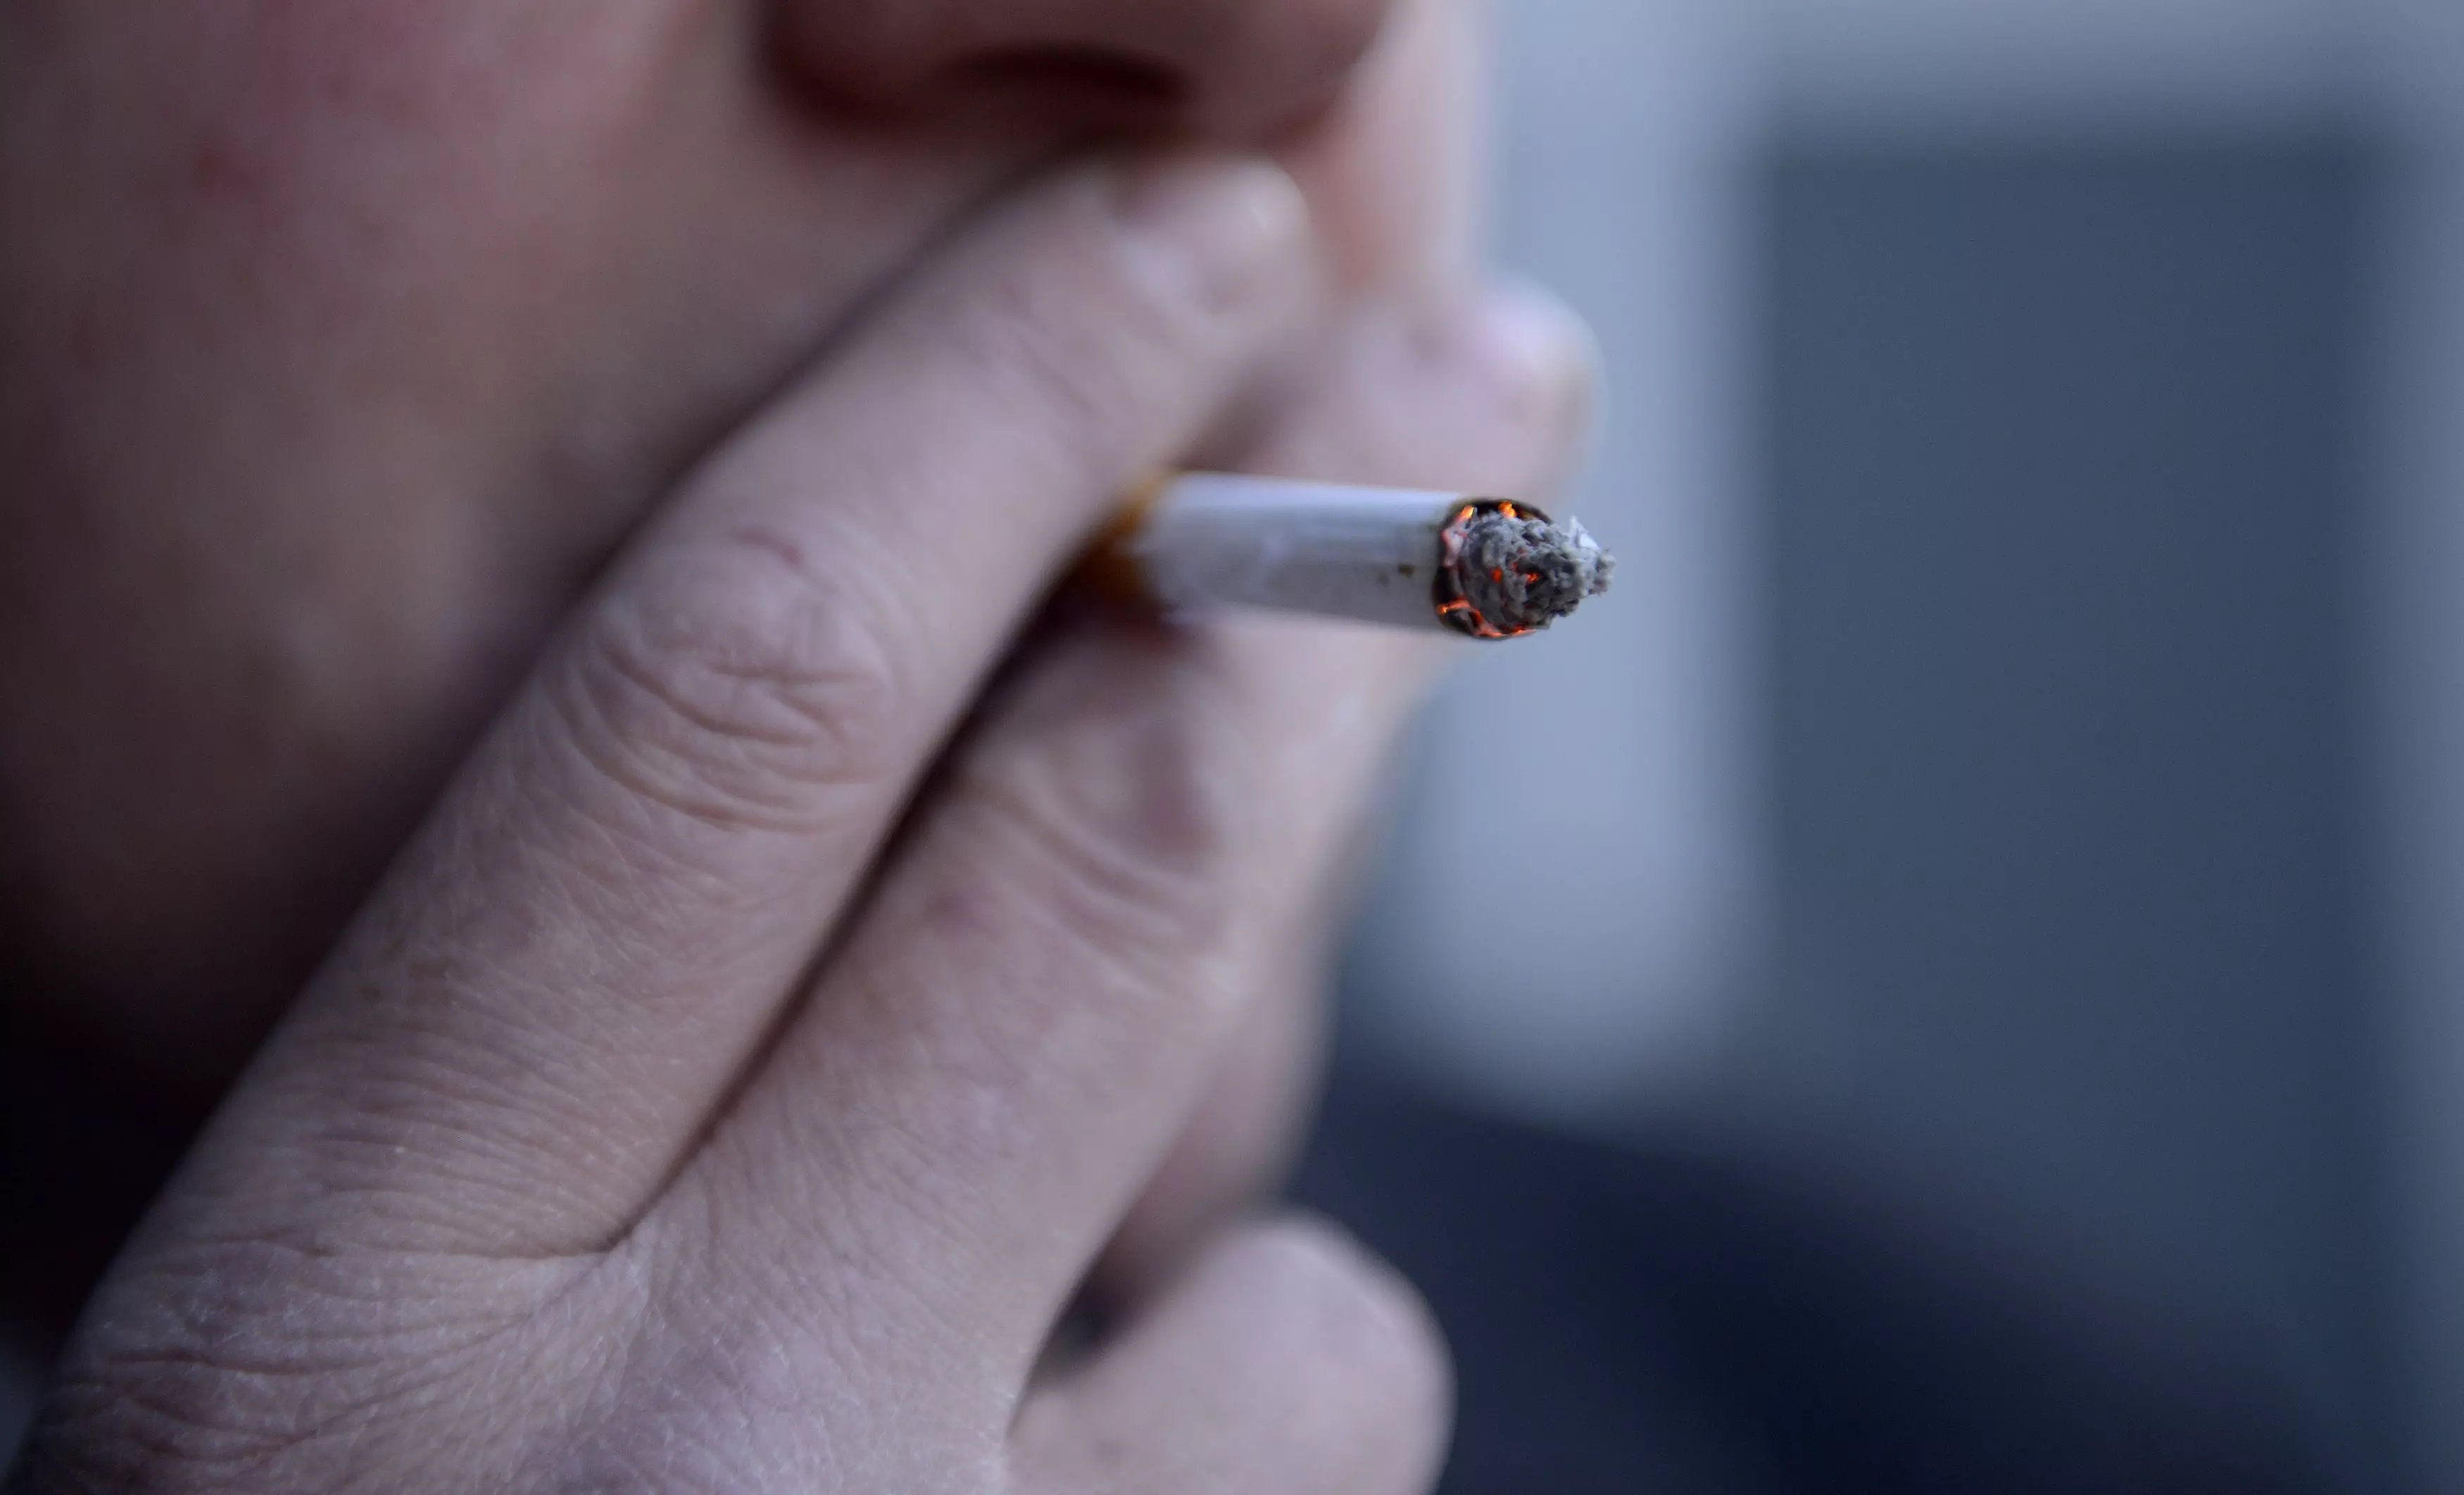 Risk of heart disease lingers 15 years after quitting smoking